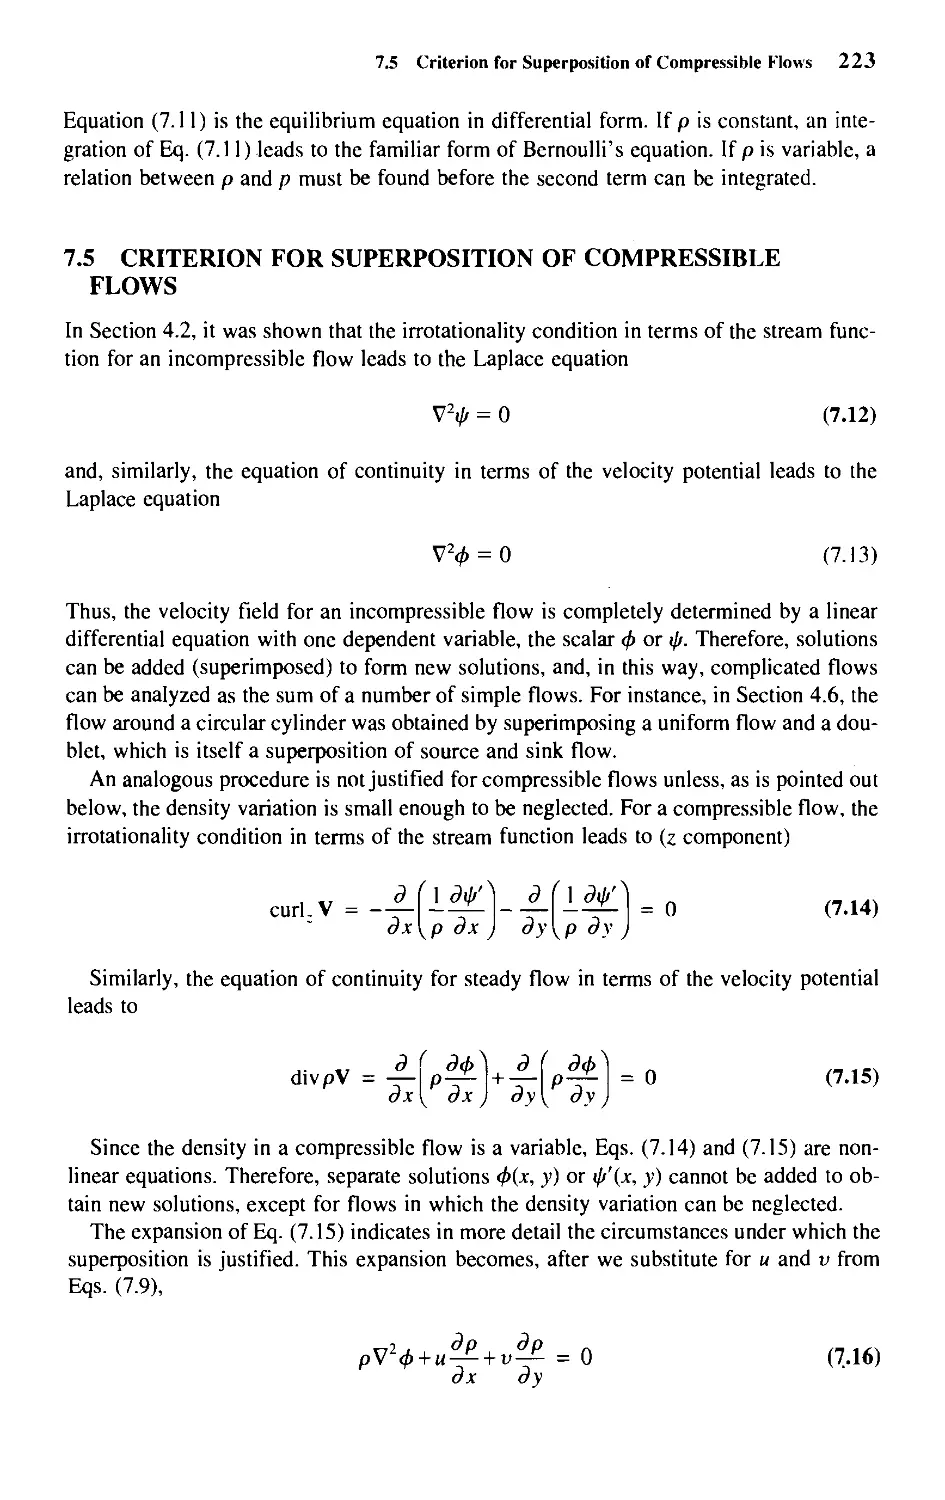 7.5 - Criterion for Superposition of Compressible Flows